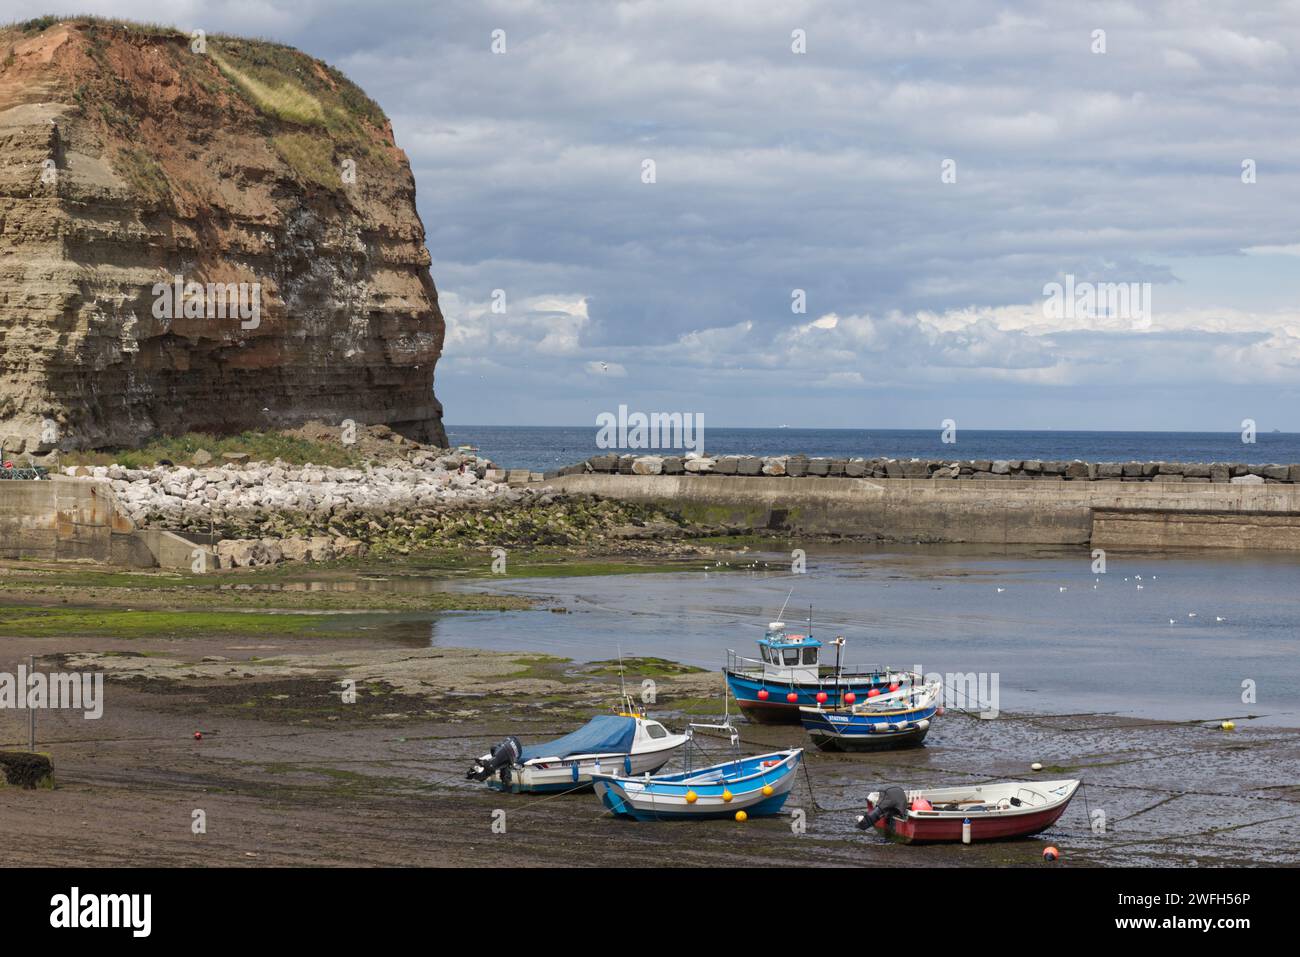 boats on the staithes, yorkshire Stock Photo